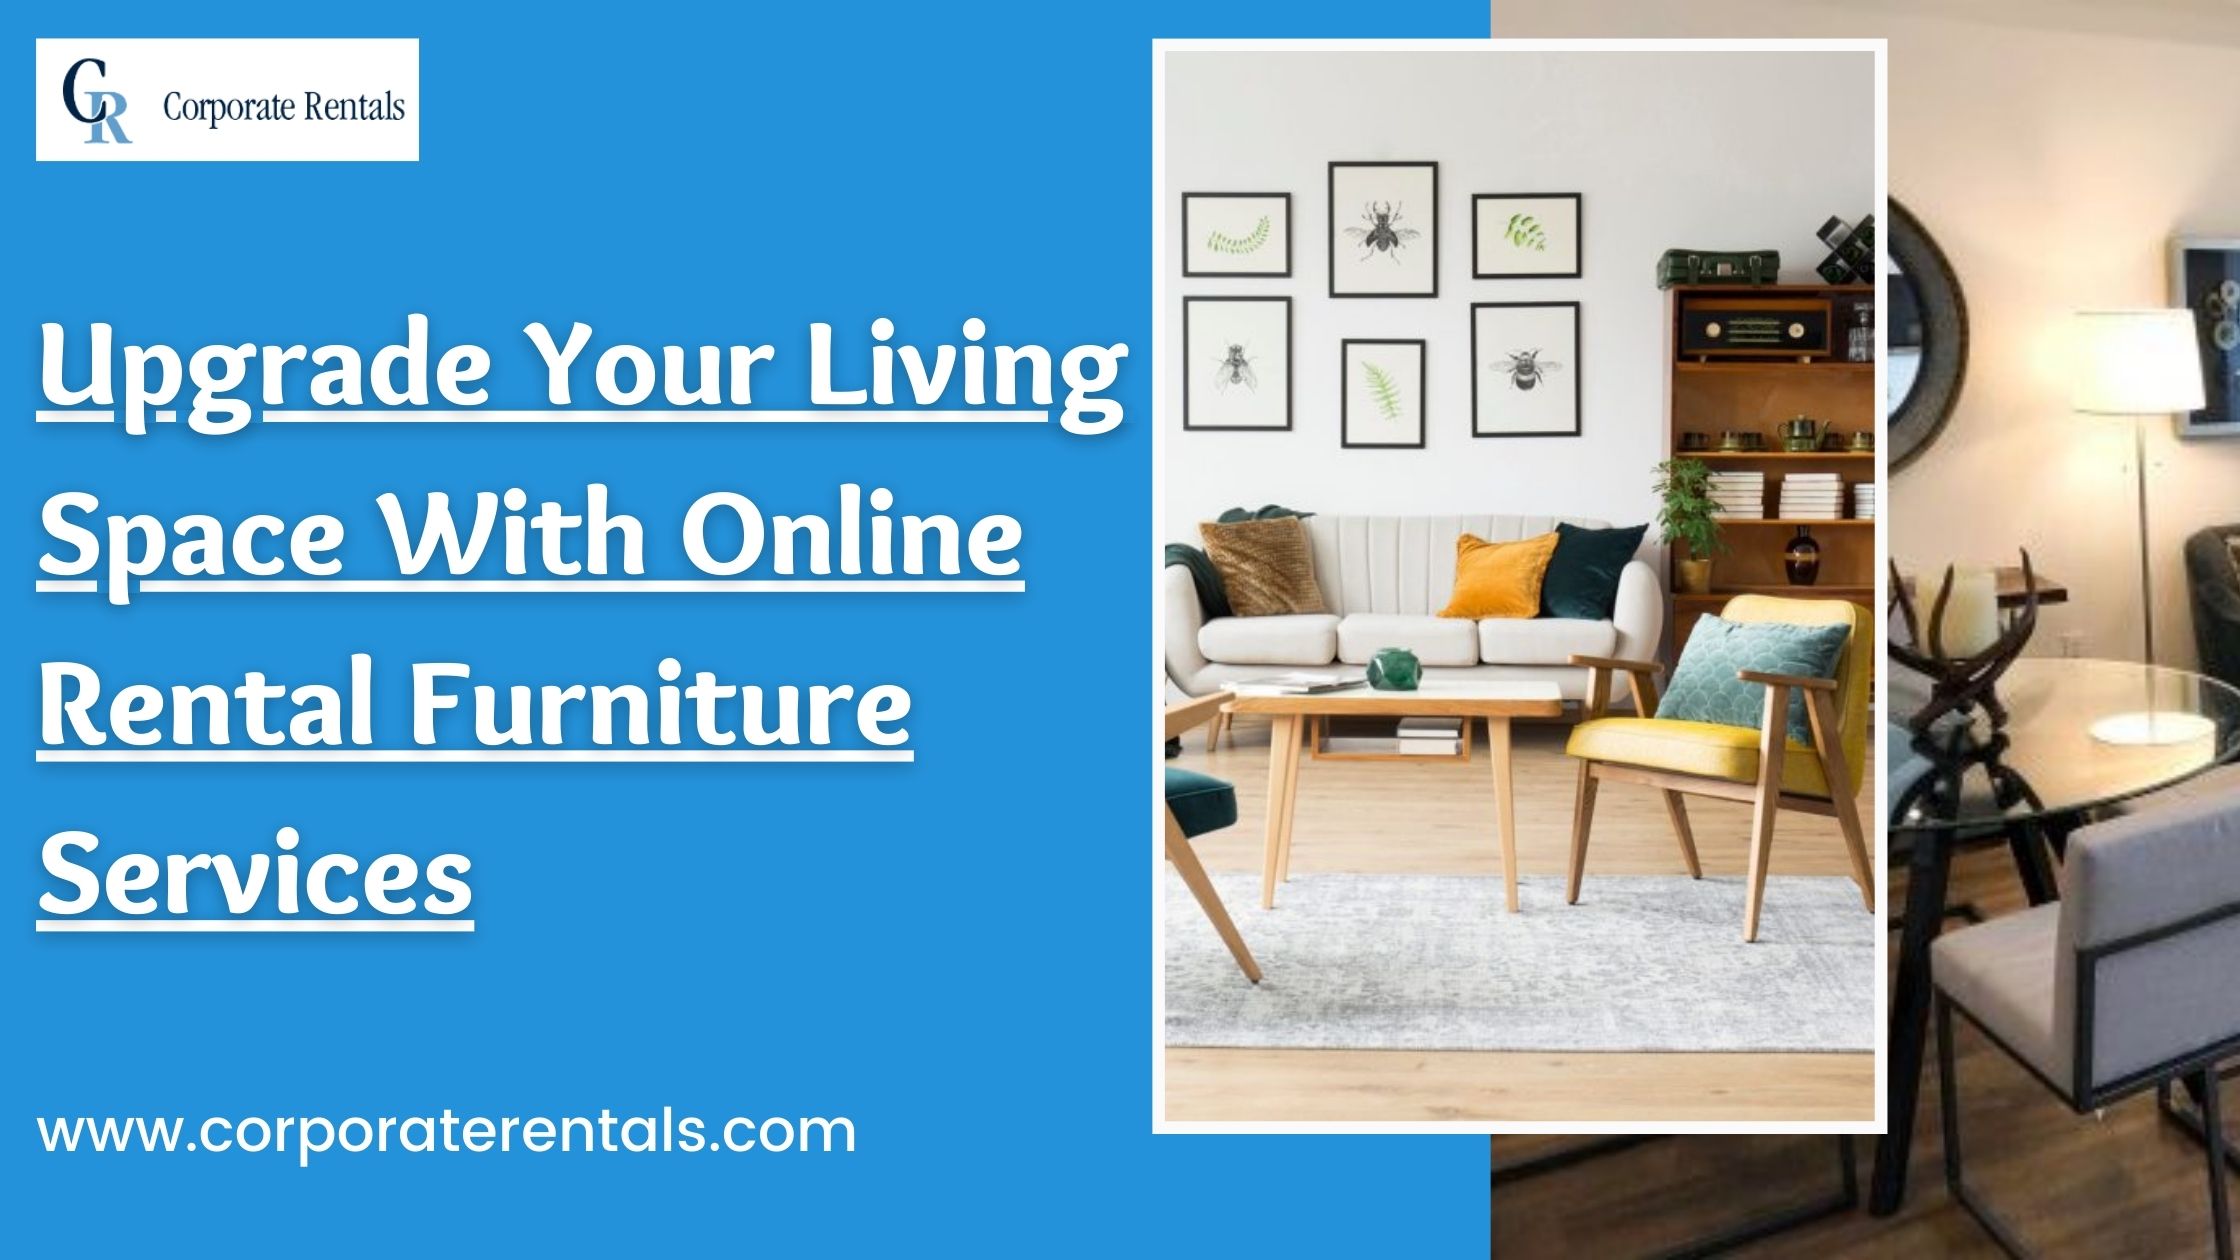 Upgrade Your Living Space With Online Rental Furniture Services